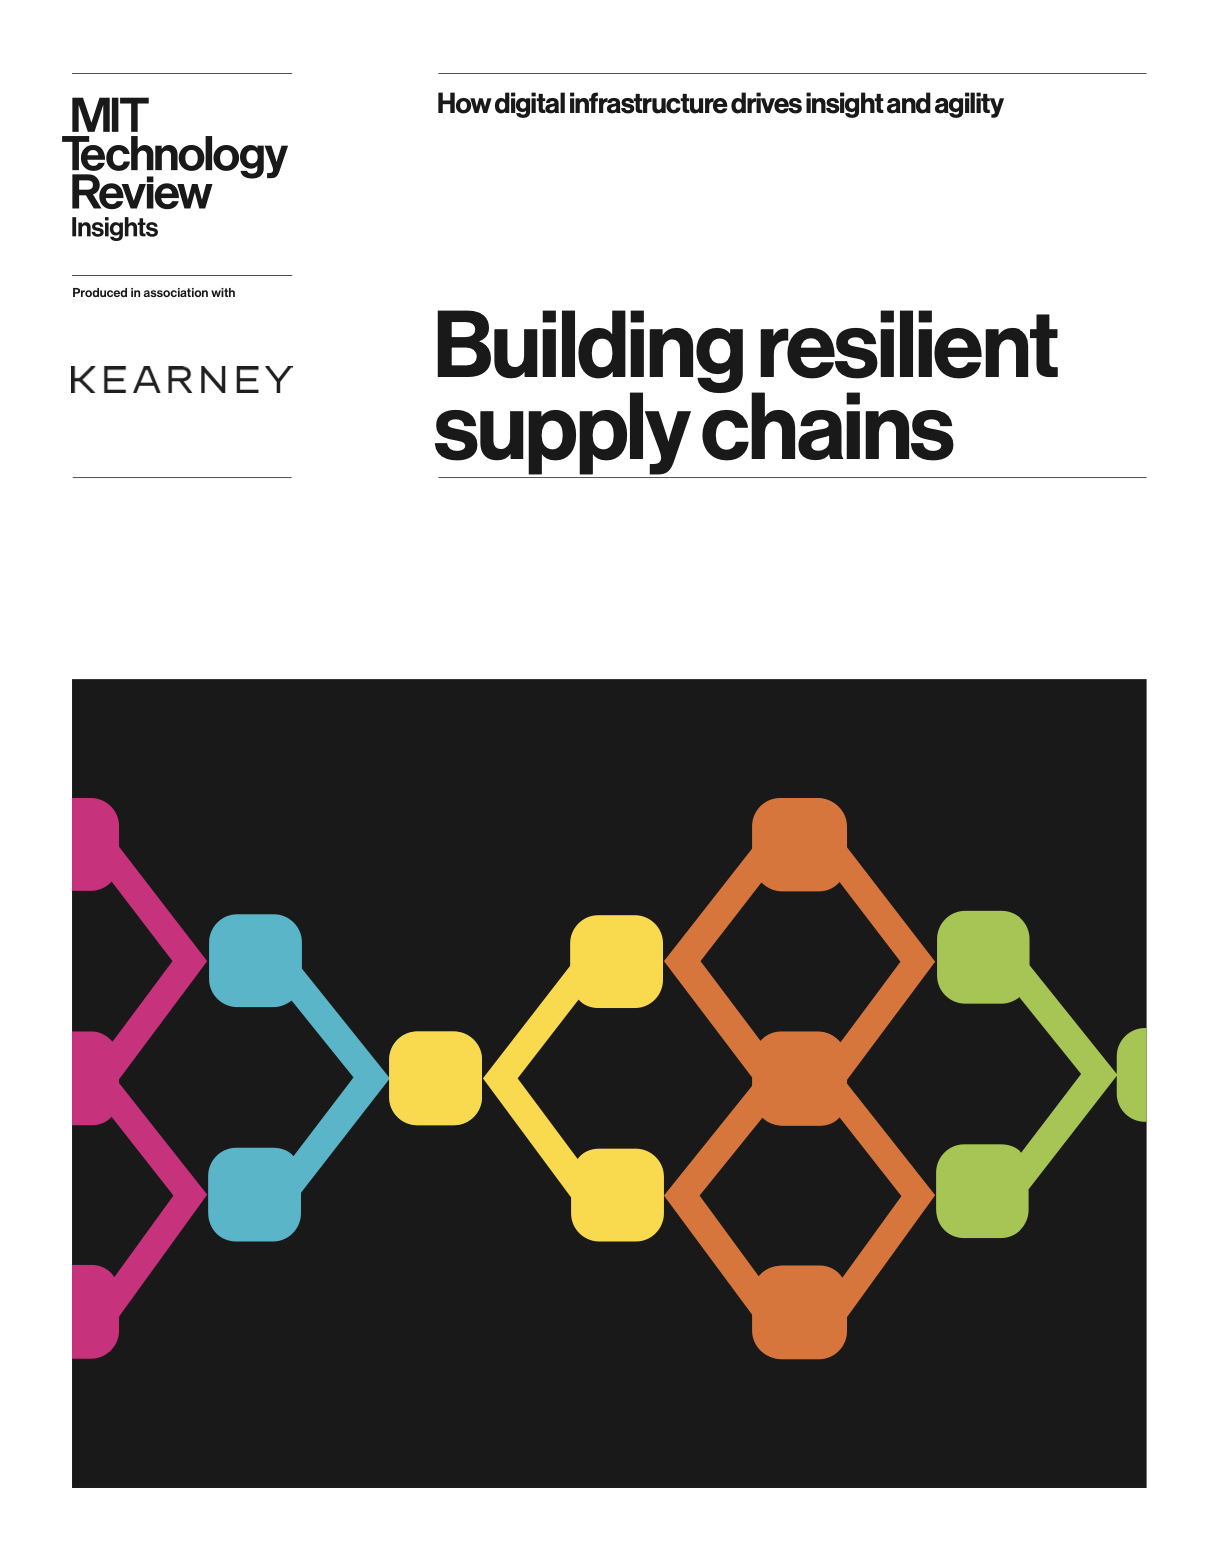 Building resilient supply chains